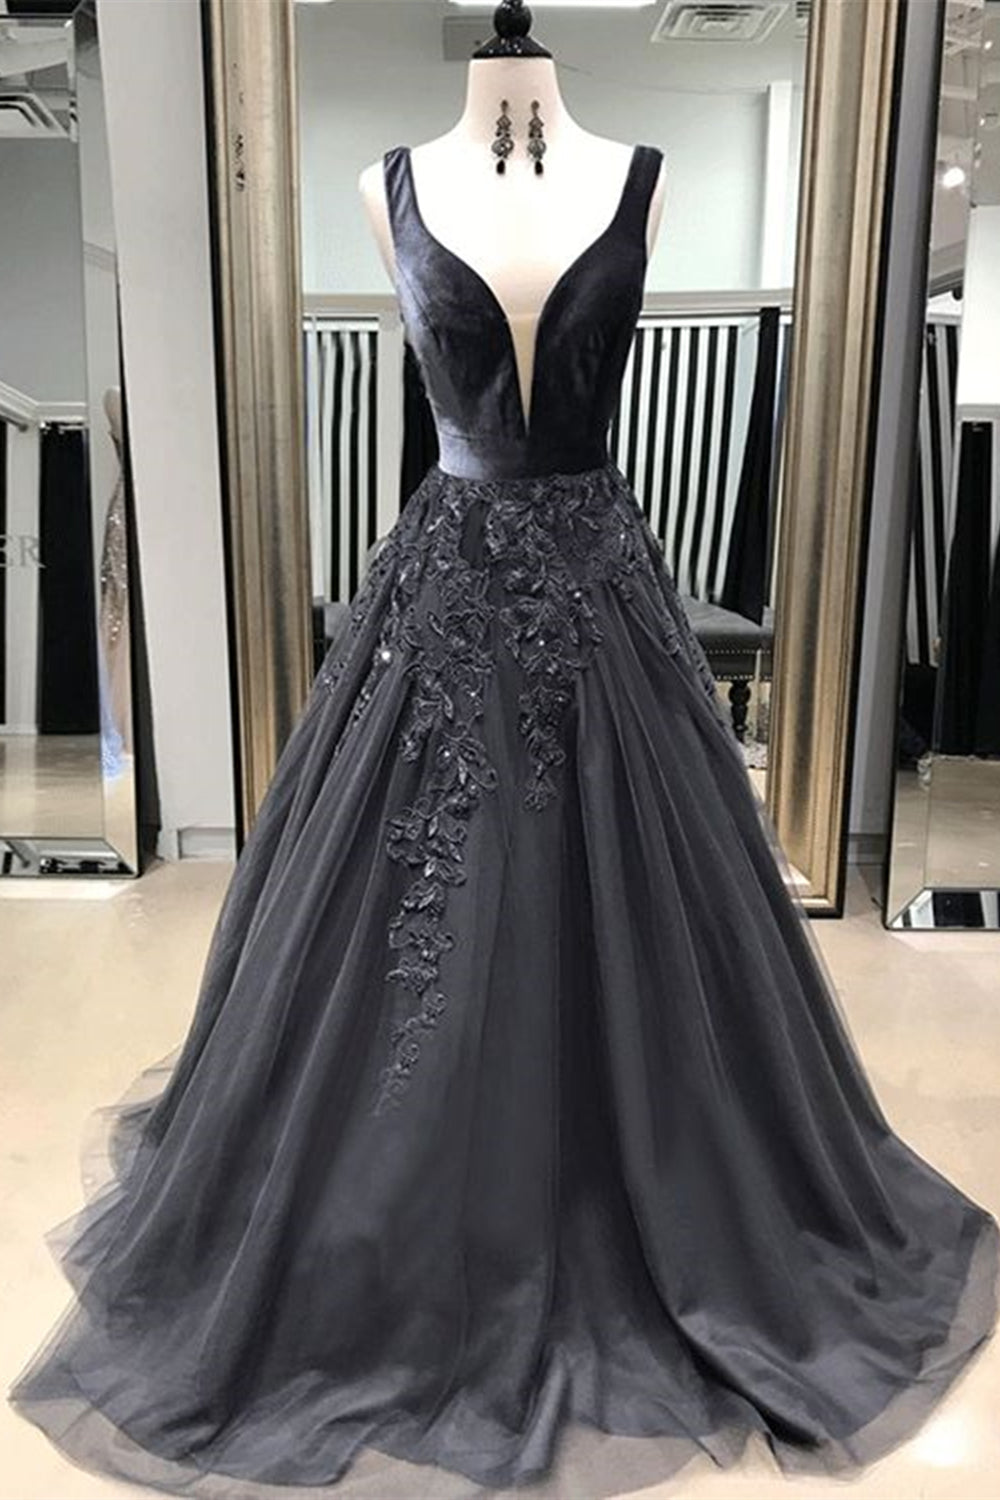 Non-Traditional A-Line Lace Black and Grey Wedding Dress Illusion Tulle  Spaghetti Straps Court Train Bridal Gown - June Bridals